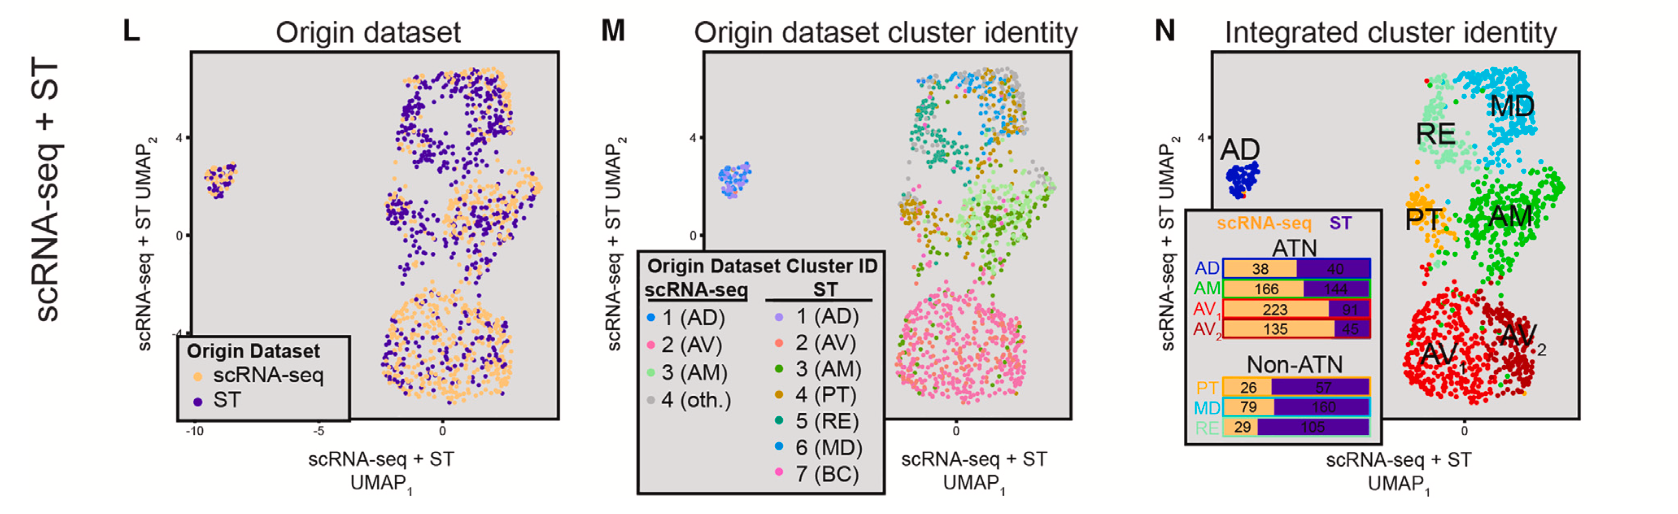 Figure 4. UMAP visualizations for integrated single cell RNA-sequencing and spatial transcriptomics data. (L) UMAP and cluster identity for the integrated scRNA-seq and ST datasets. (M) As in (L) but coloring points according to cluster identity from the original (unintegrated) dataset. (N) As in (L) but coloring points according to cluster identity obtained from the integrated analysis, overlaid with spatial locations derived from ST dataset. Inset provides the number of scRNA-seq cells (gold) and ST spots (purple) composing each of the integrated clusters. Image adapted from Figure 2 from Kapustina et al. 2024. (CC BY 4.0).